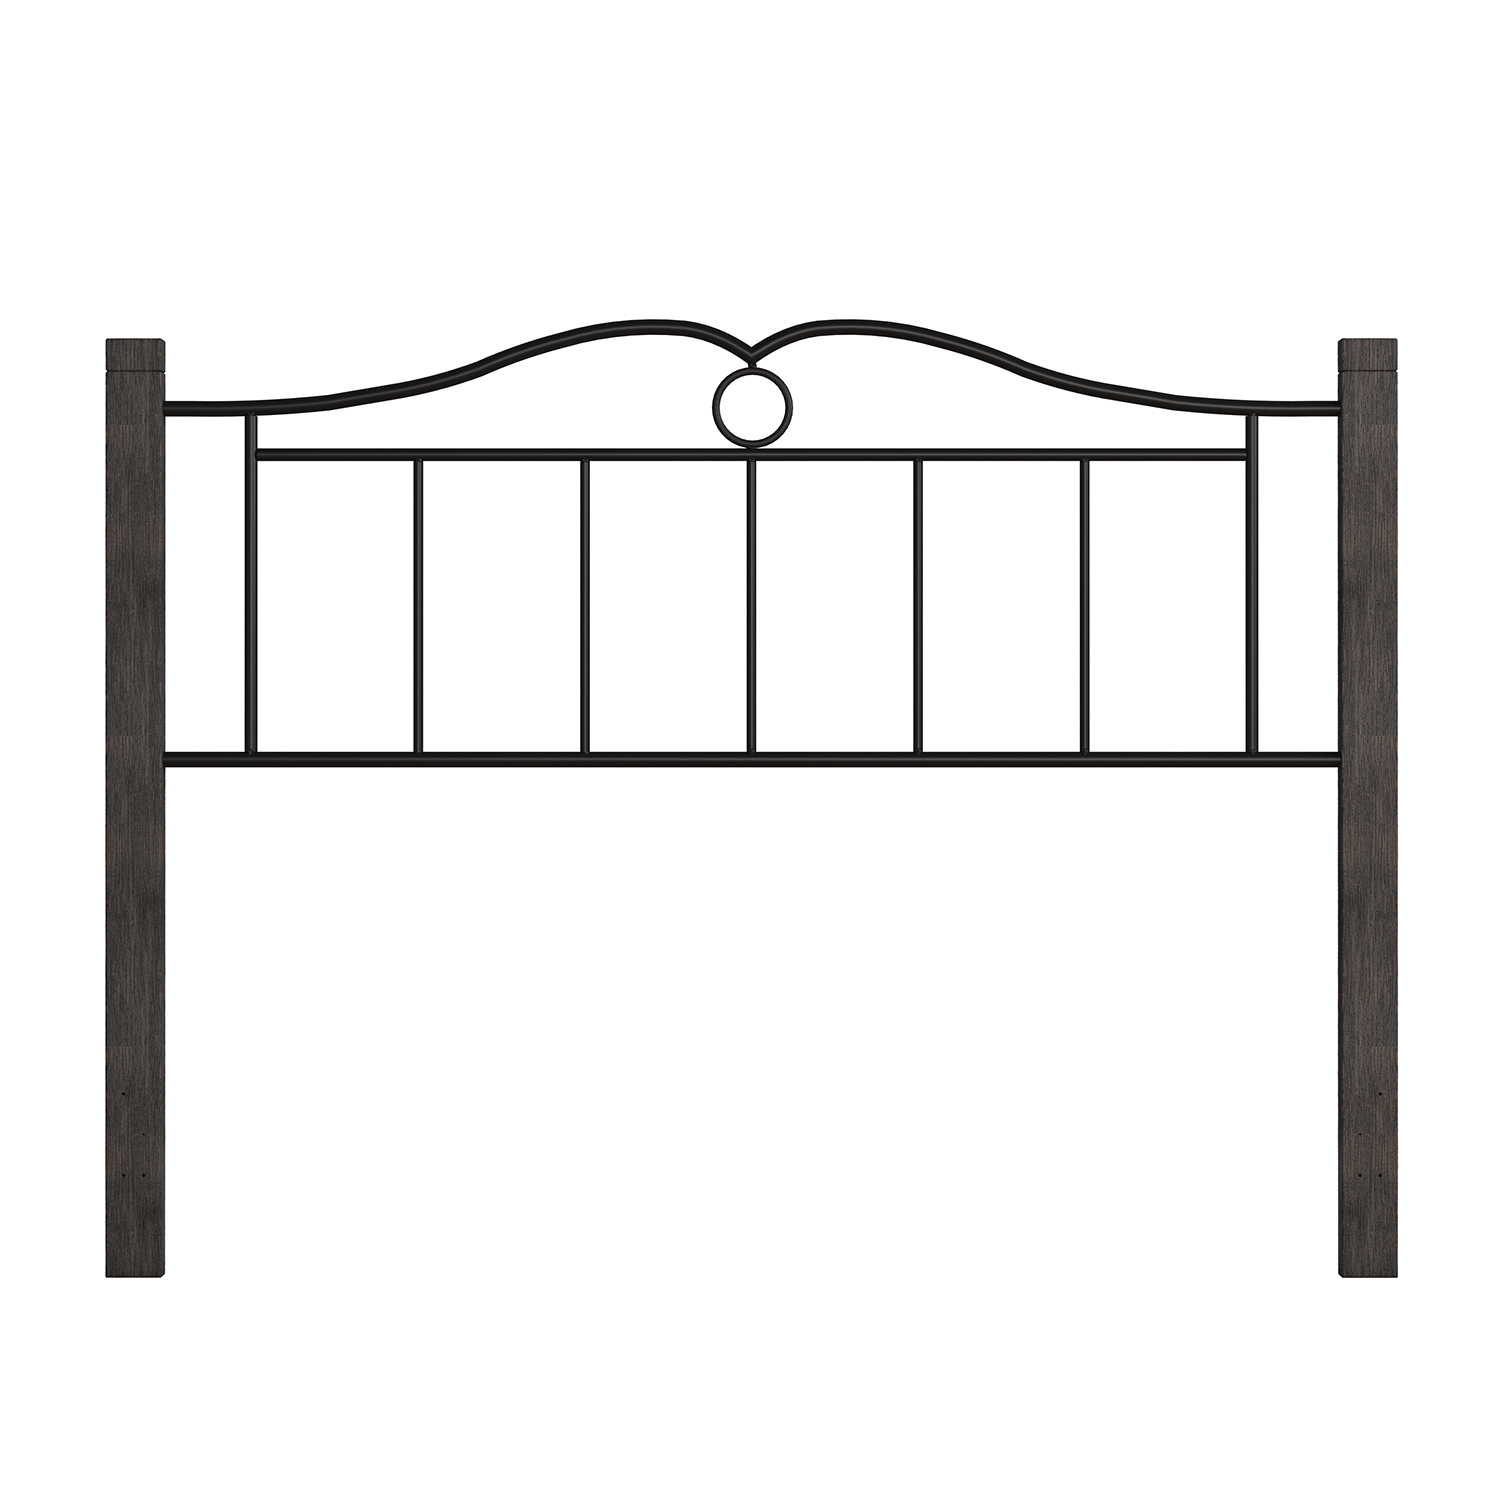 Hillsdale Dumont Metal Headboard with Double Arched Scroll Design - Textured Black/Brushed Charcoal